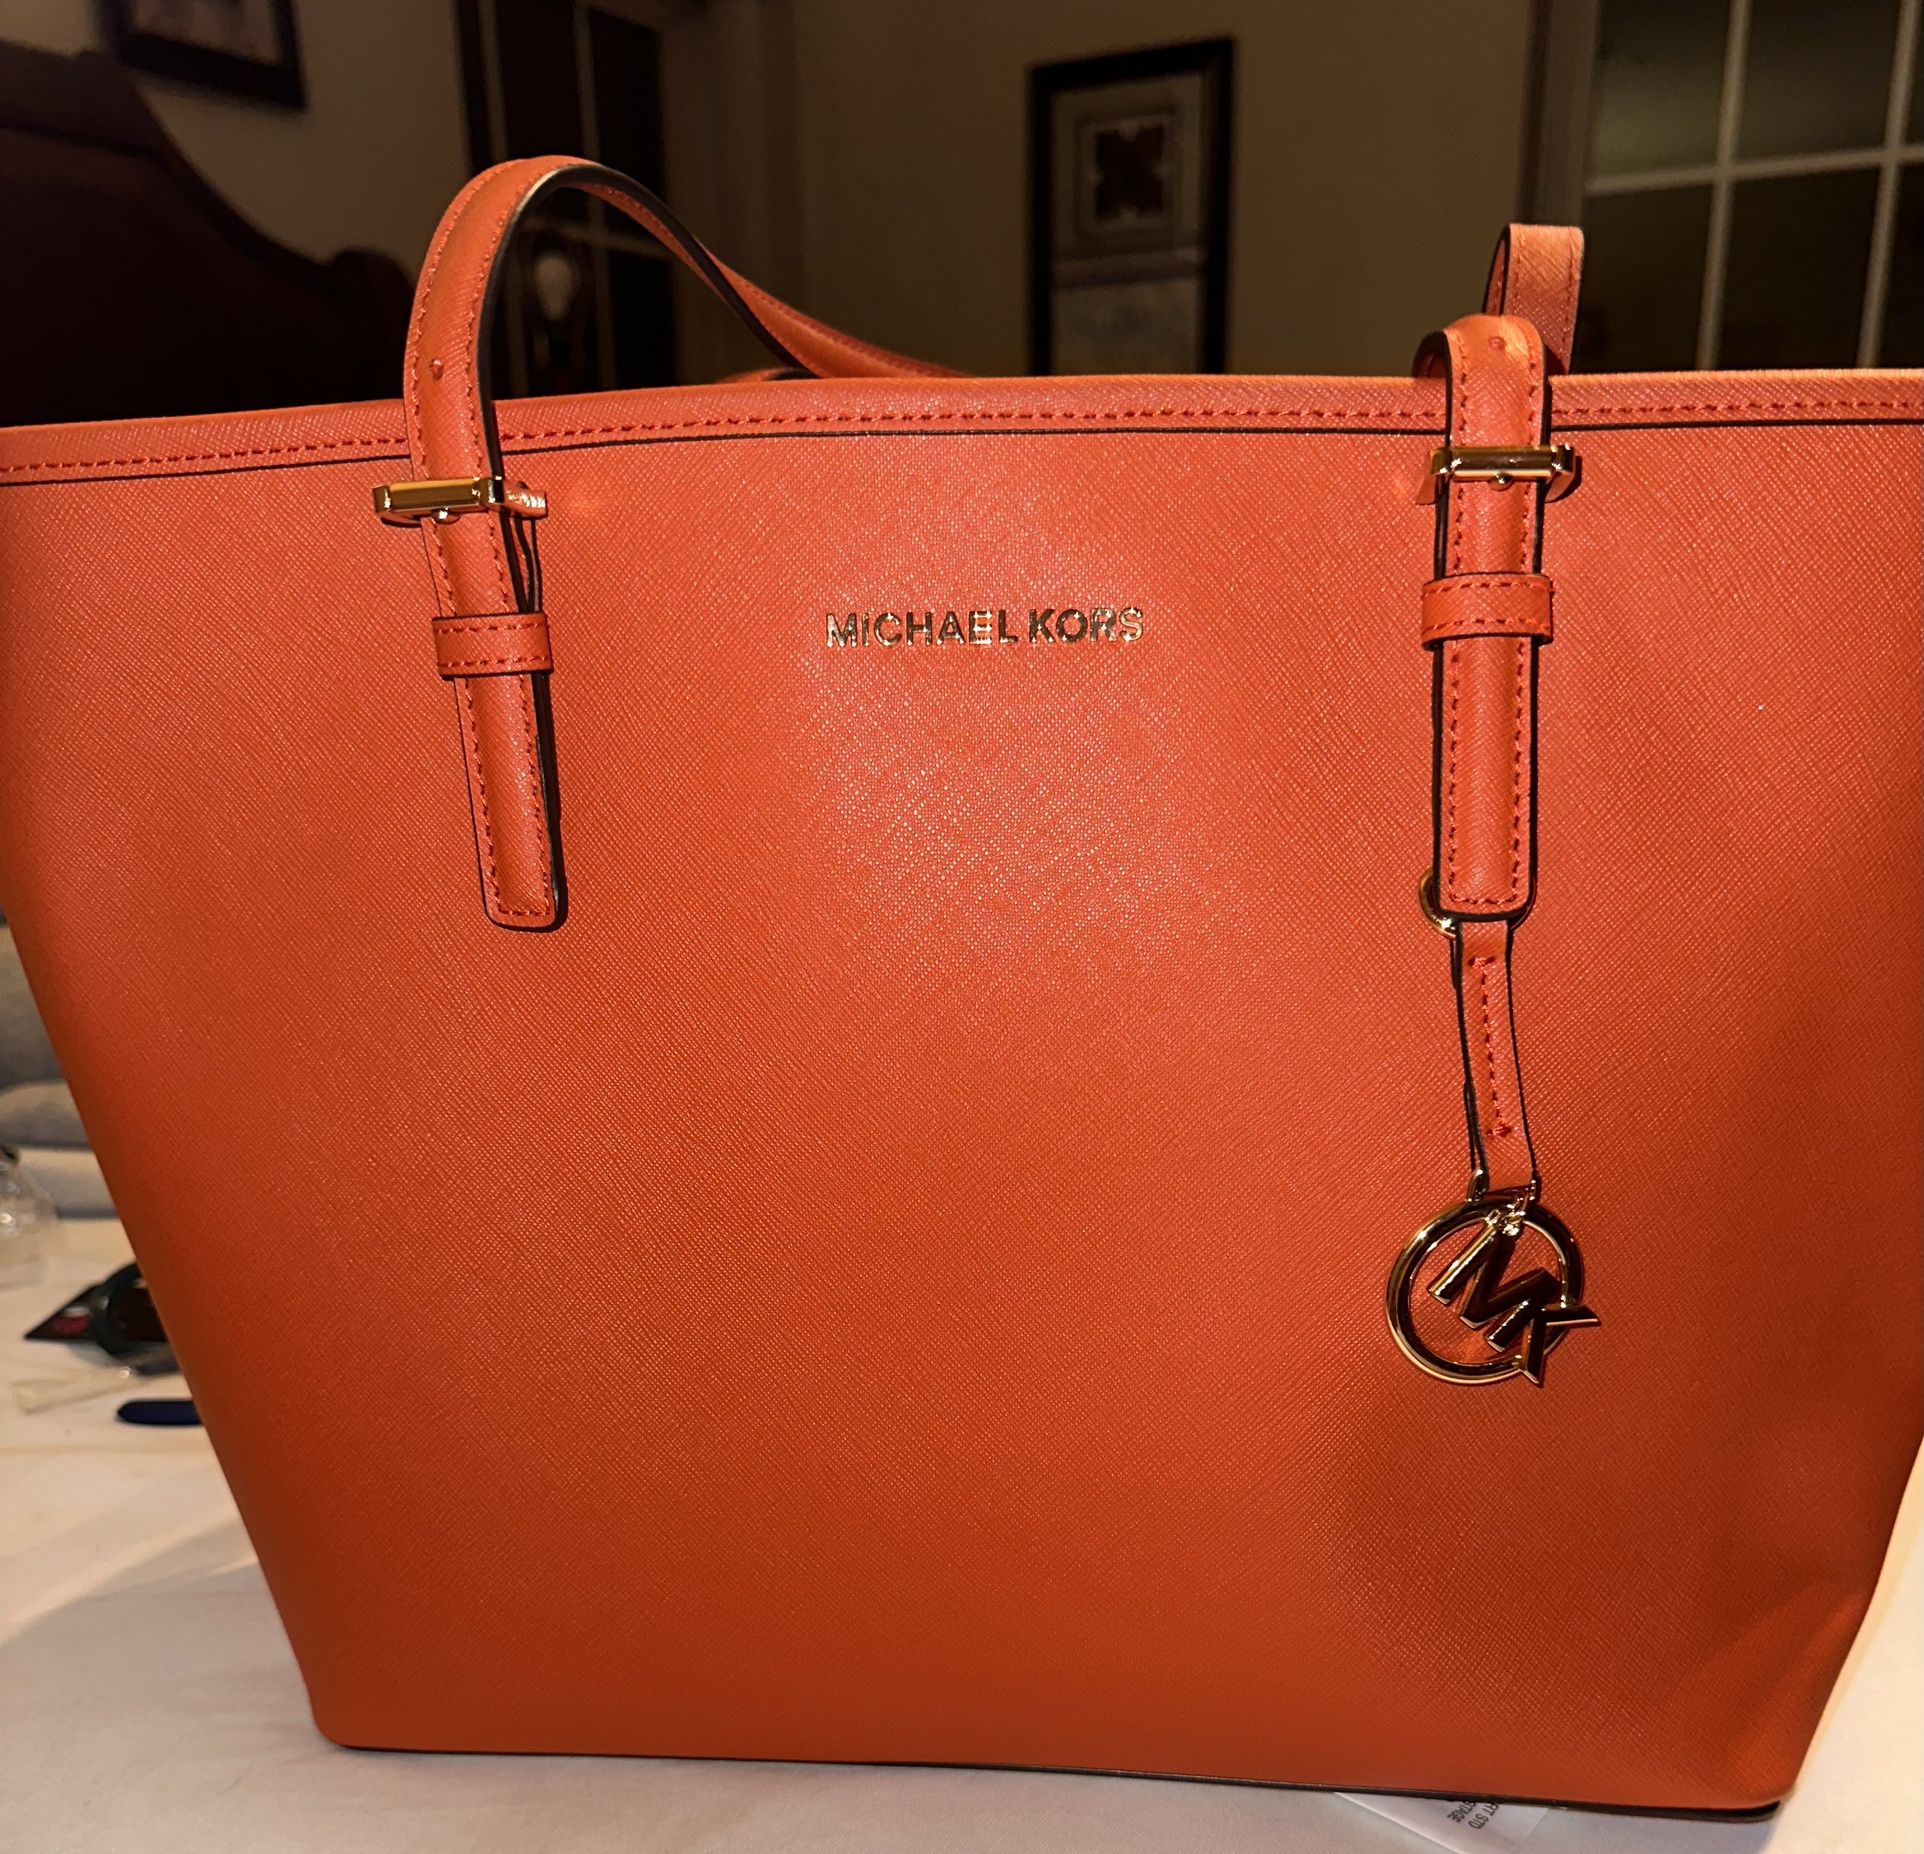 NWT Michael Kors Persimmon Jet Set Travel Saffiano Leather Top Zip Tote  W/Dust Bag for Sale in Fawn Grove, PA - OfferUp